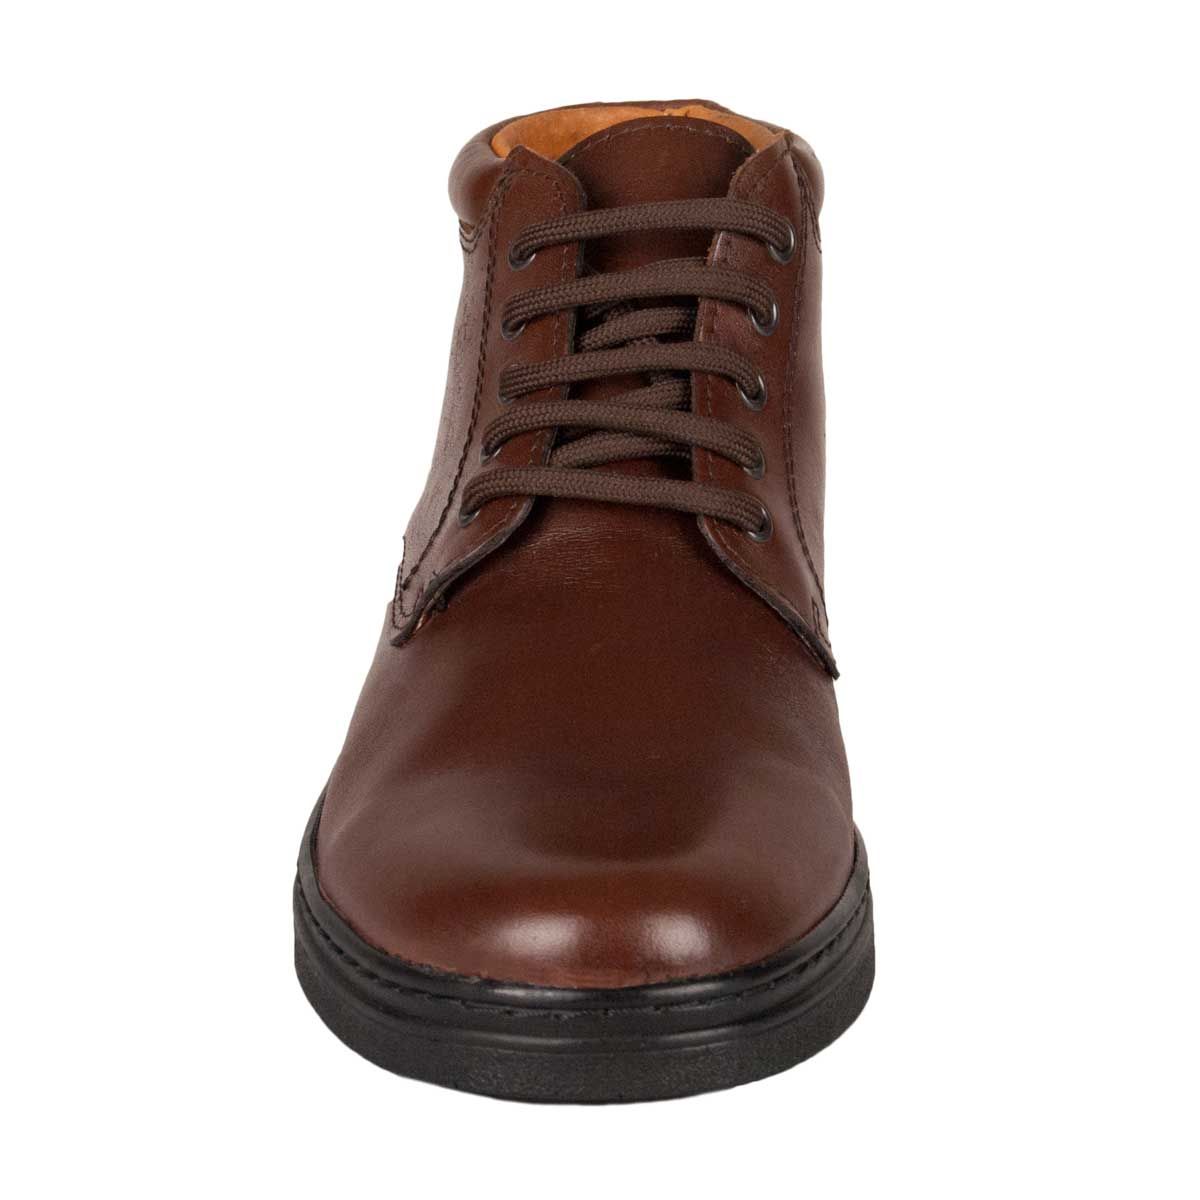 Purapiel Guarantee. 10 years of warranty. Comfortable and light leather boot for gentleman. With laces of thick thread and metallic eyelets. Flexible Hormo. Previous and later buttress, and double seam, giving the boot greater firmness and consistency. Interior and skin plant. Stitched floor. Anti-slip rubber sole.